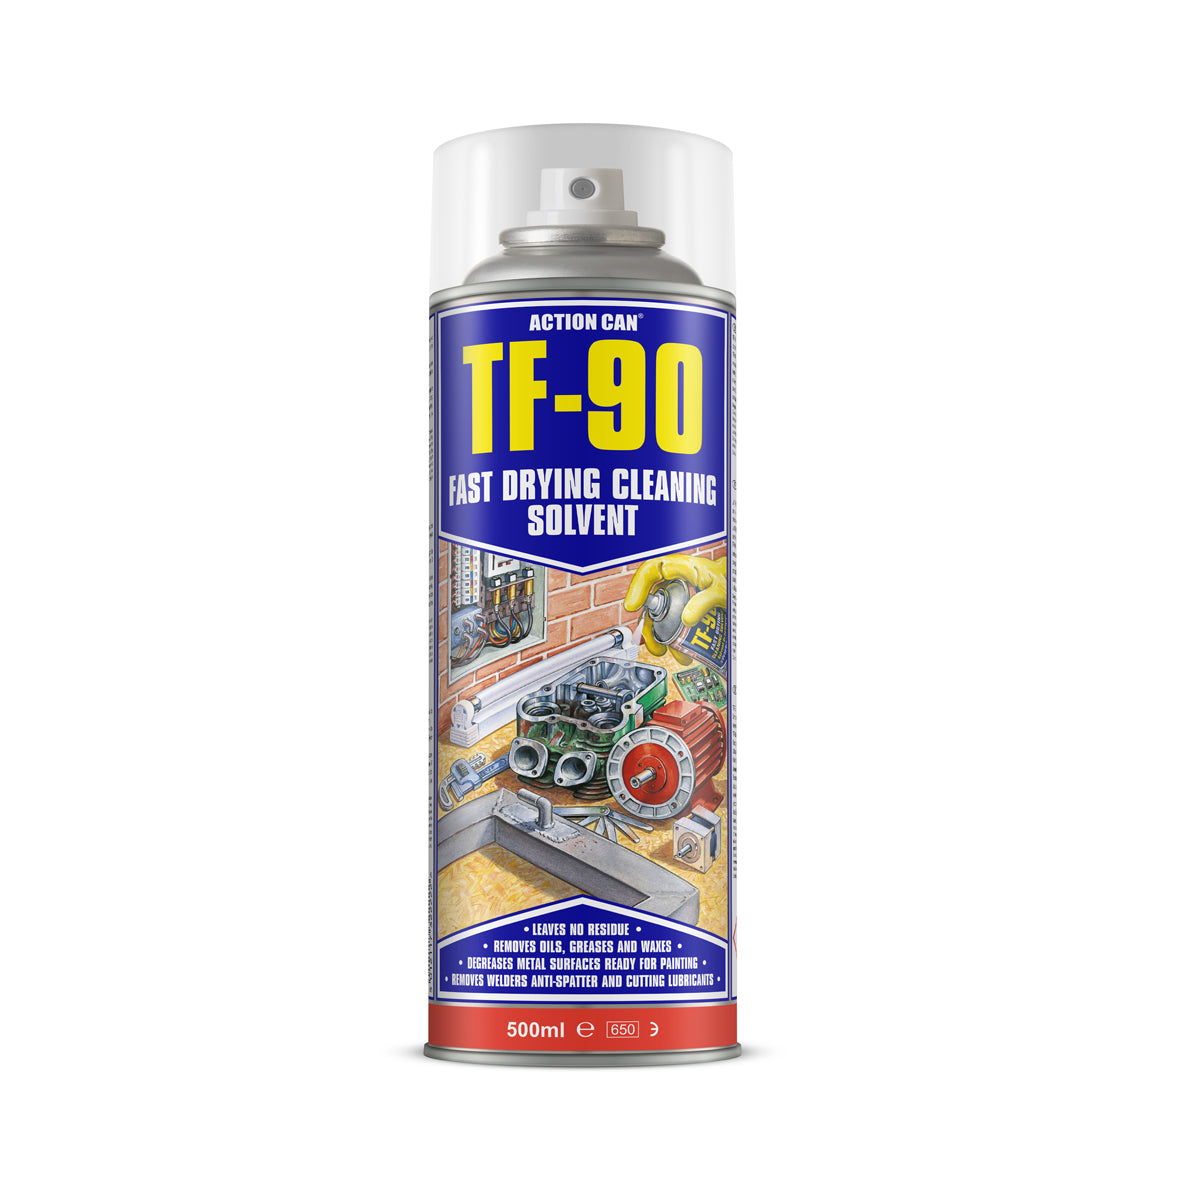 Action Can TF-90 Fast Drying Cleaning Solvent Degreaser Spray Aerosol 500ml